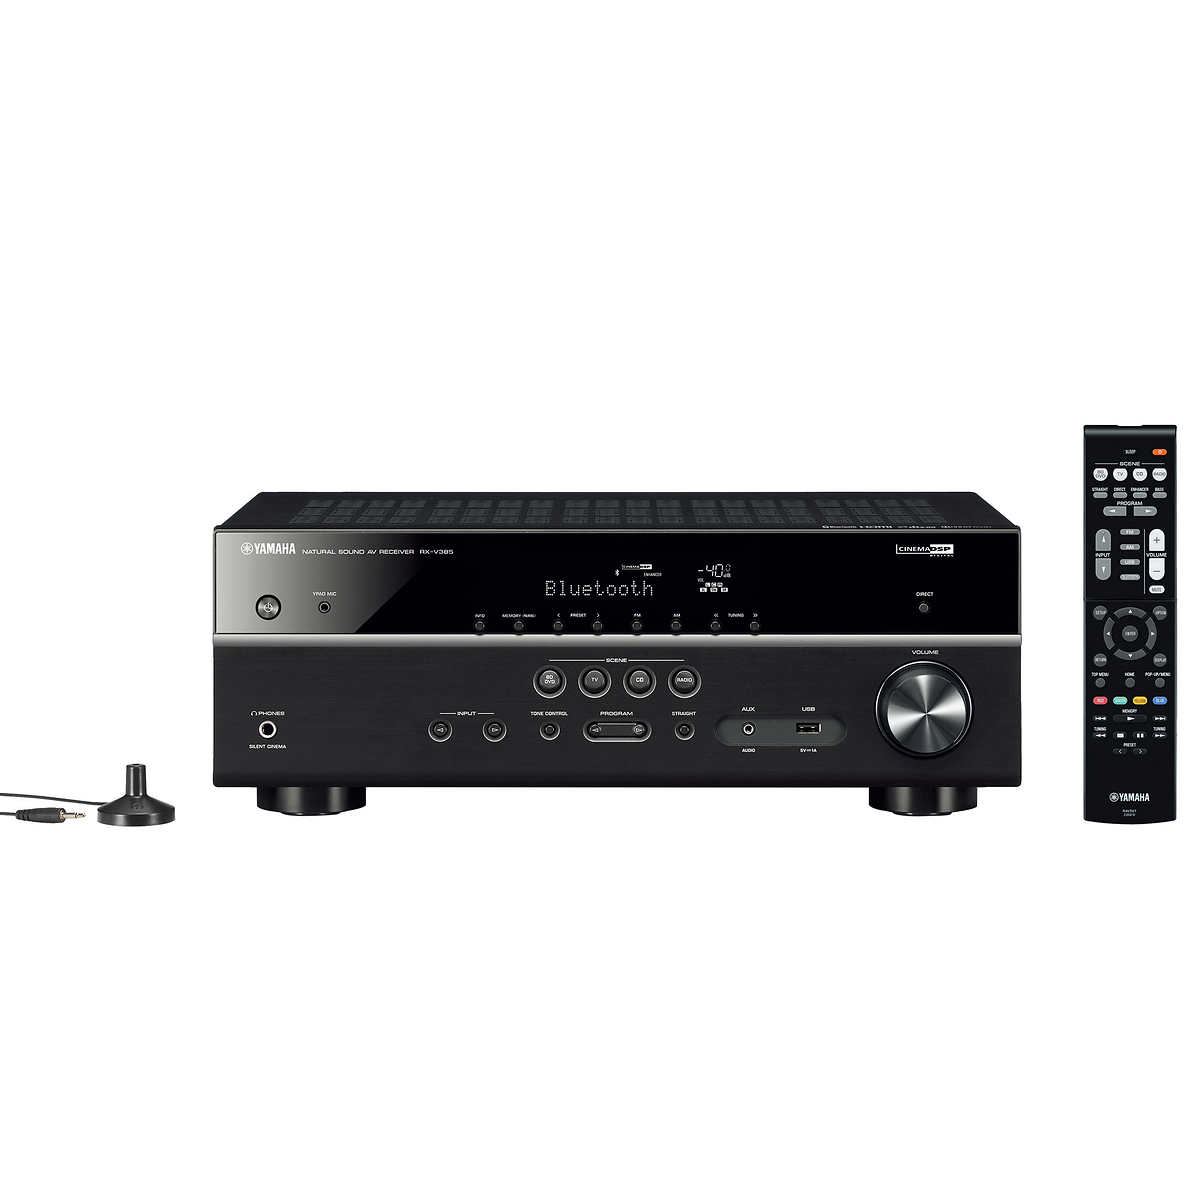 Yamaha RX-V385 5.1 ch HDR Receiver | Costco